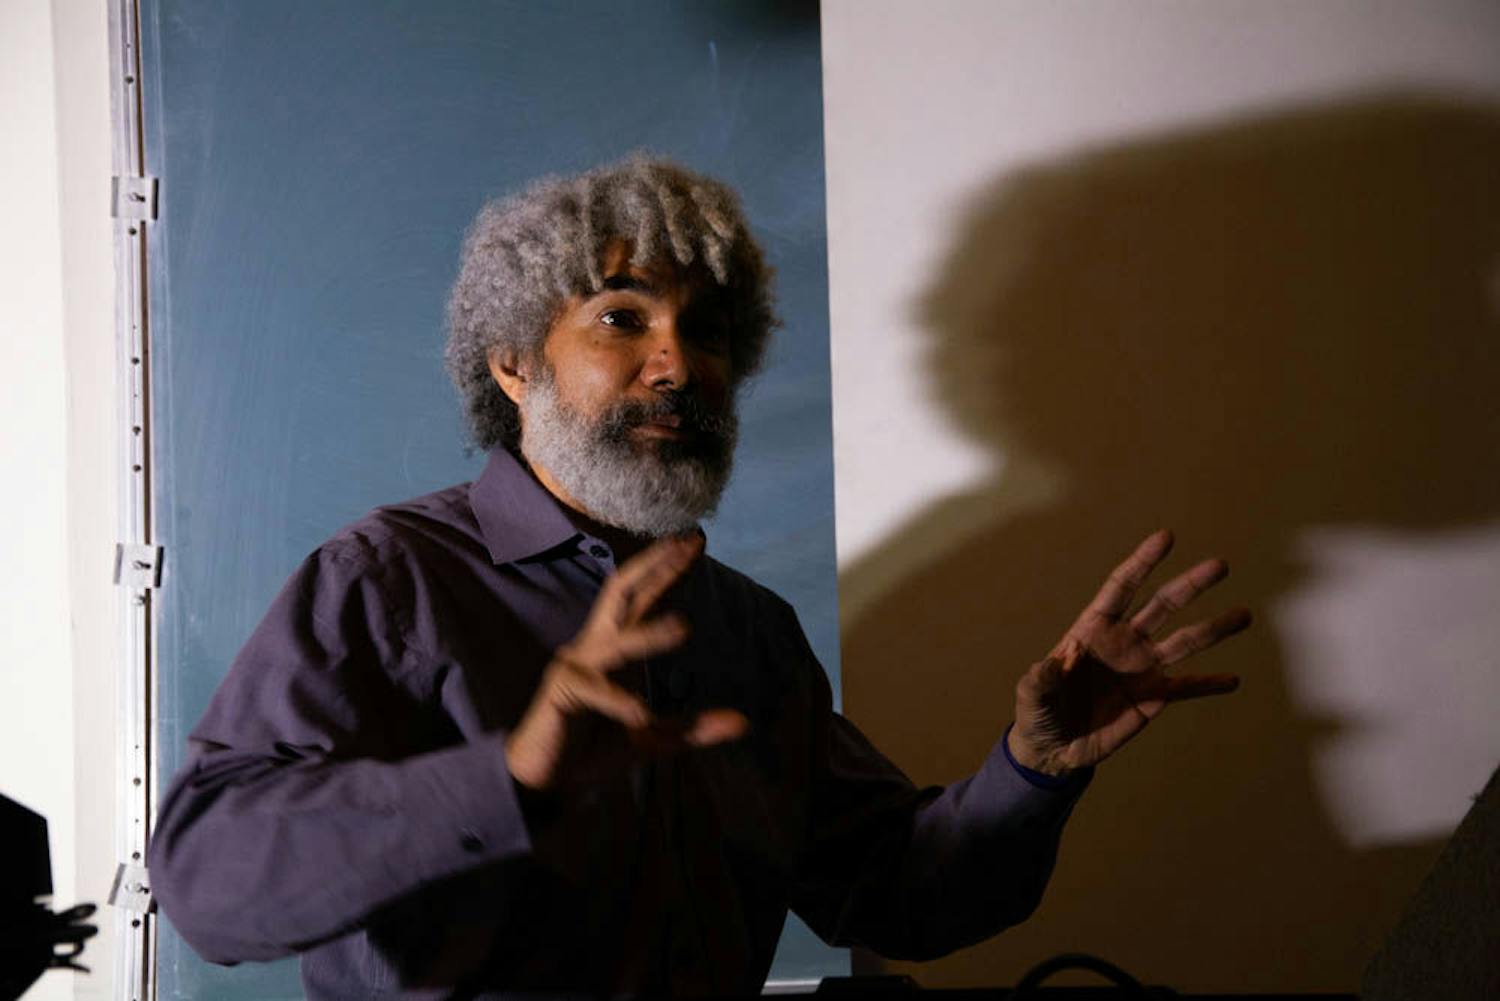 Fred Wilson, a New York-based conceptual artist, brings representation and visibility of racial minority subjects by recontextualizing mainstream spaces in museums and cultural institutions. He&nbsp;presented a lecture to about 80 students and art enthusiasts Jan. 15 at Little Hall.